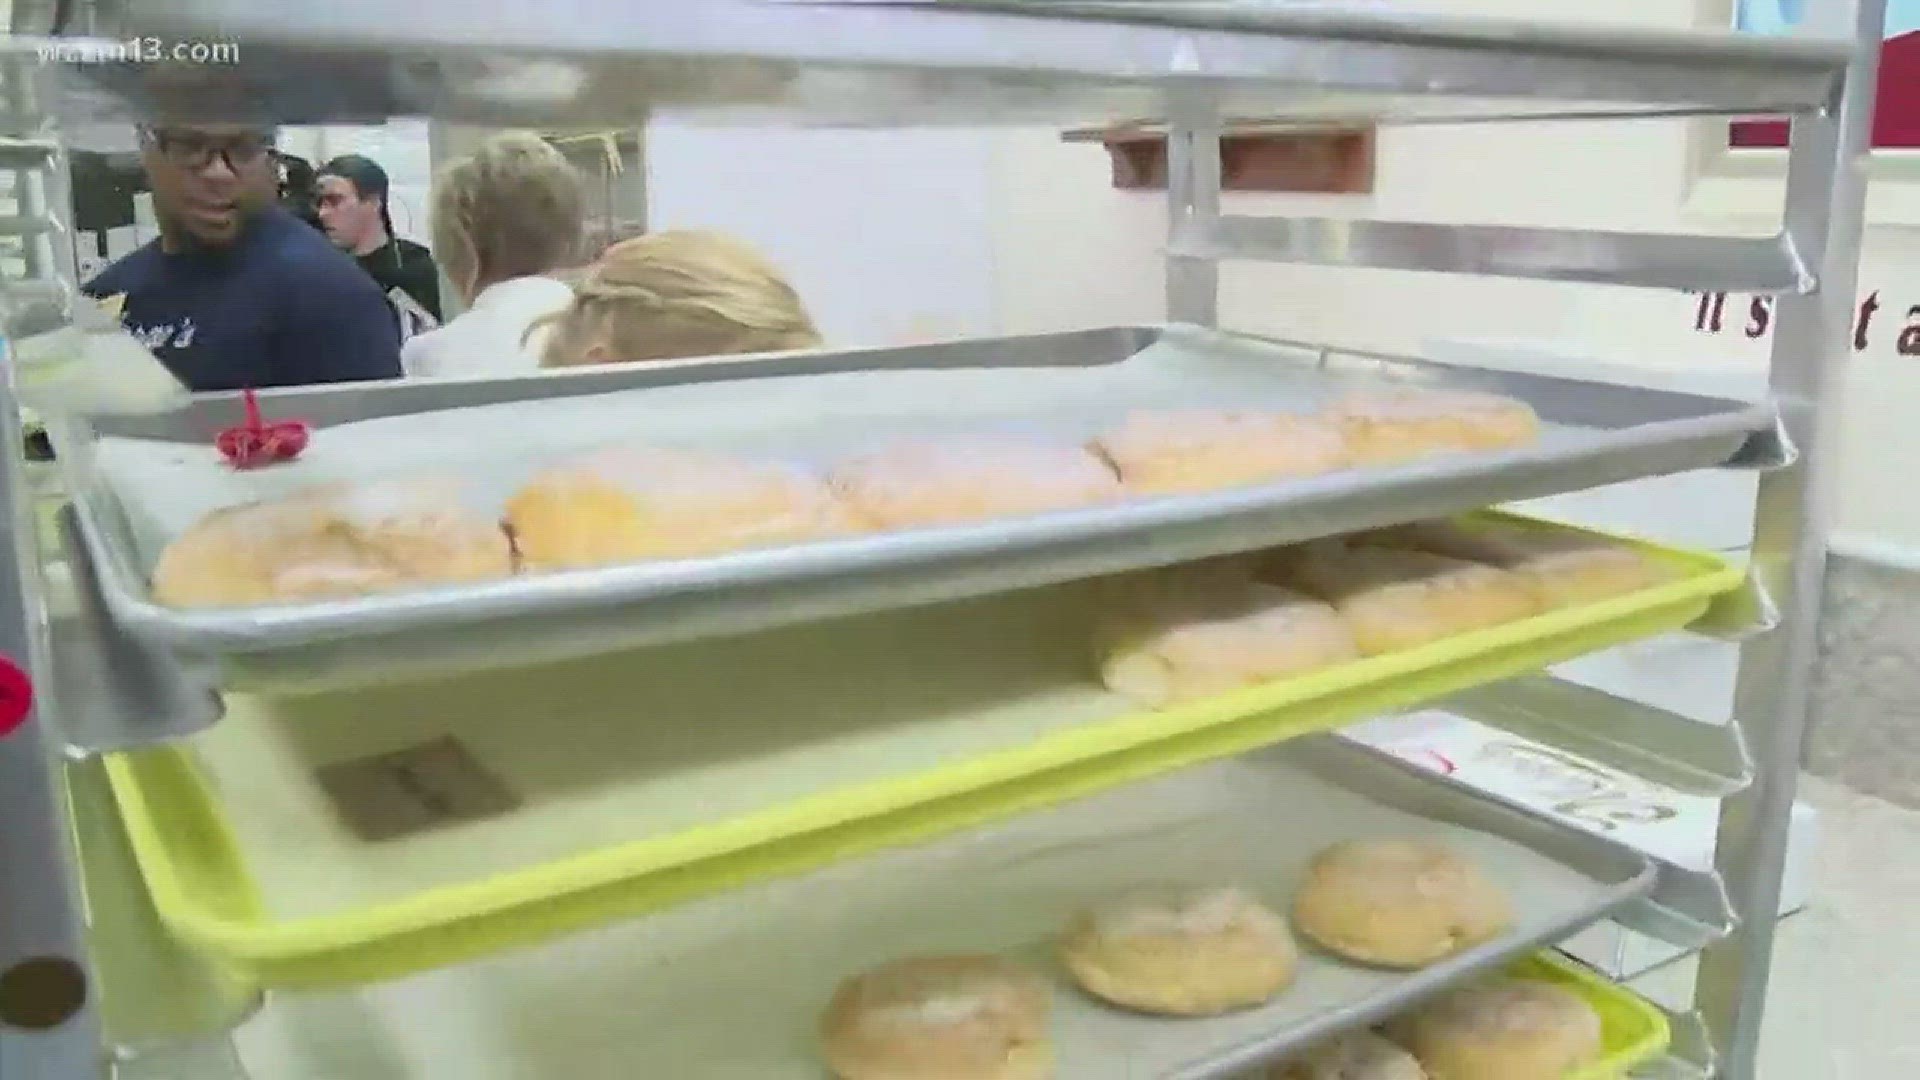 West Michigan craves paczki on Fat Tuesday, part 2